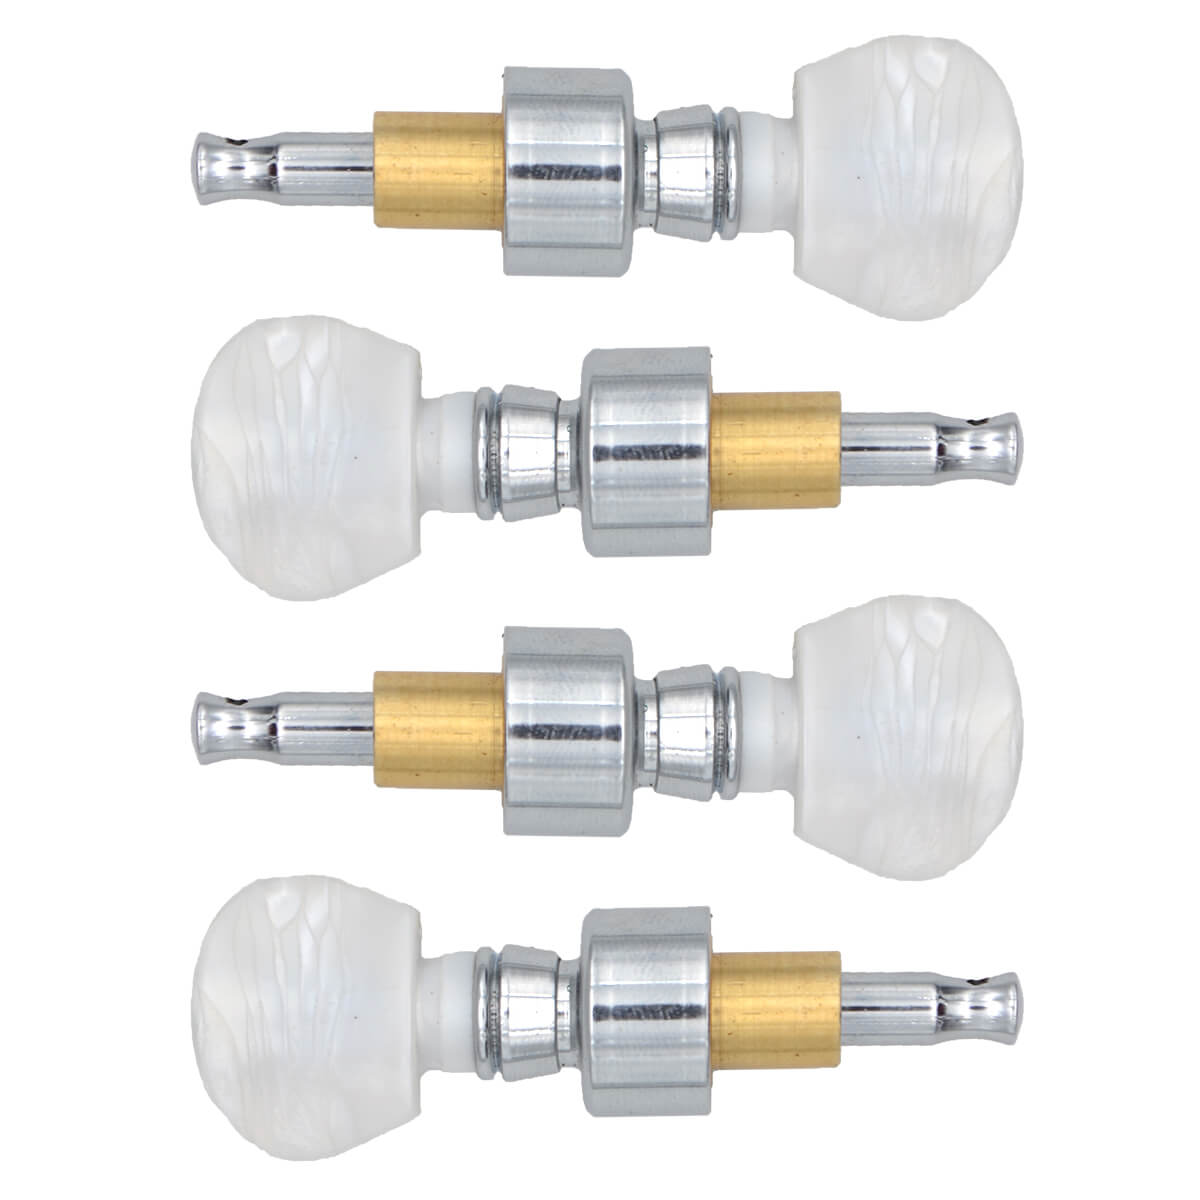 Gold Tone Planetary Banjo Tuner Pegs: Chrome (Installed)